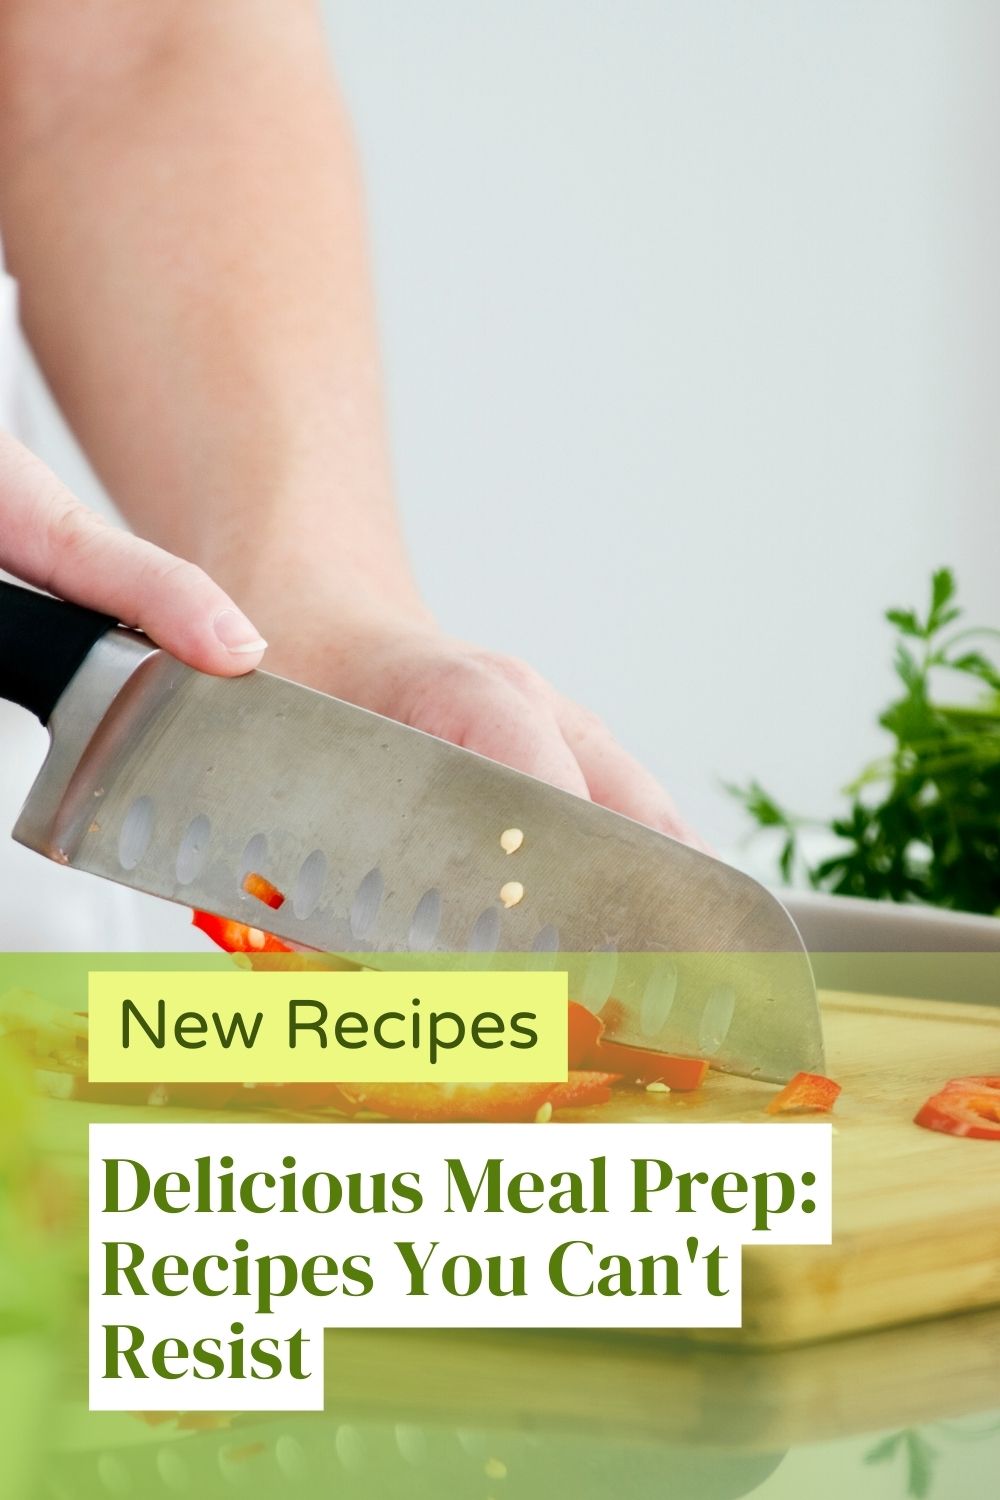 Delicious Meal Prep: Recipes You Can't Resist